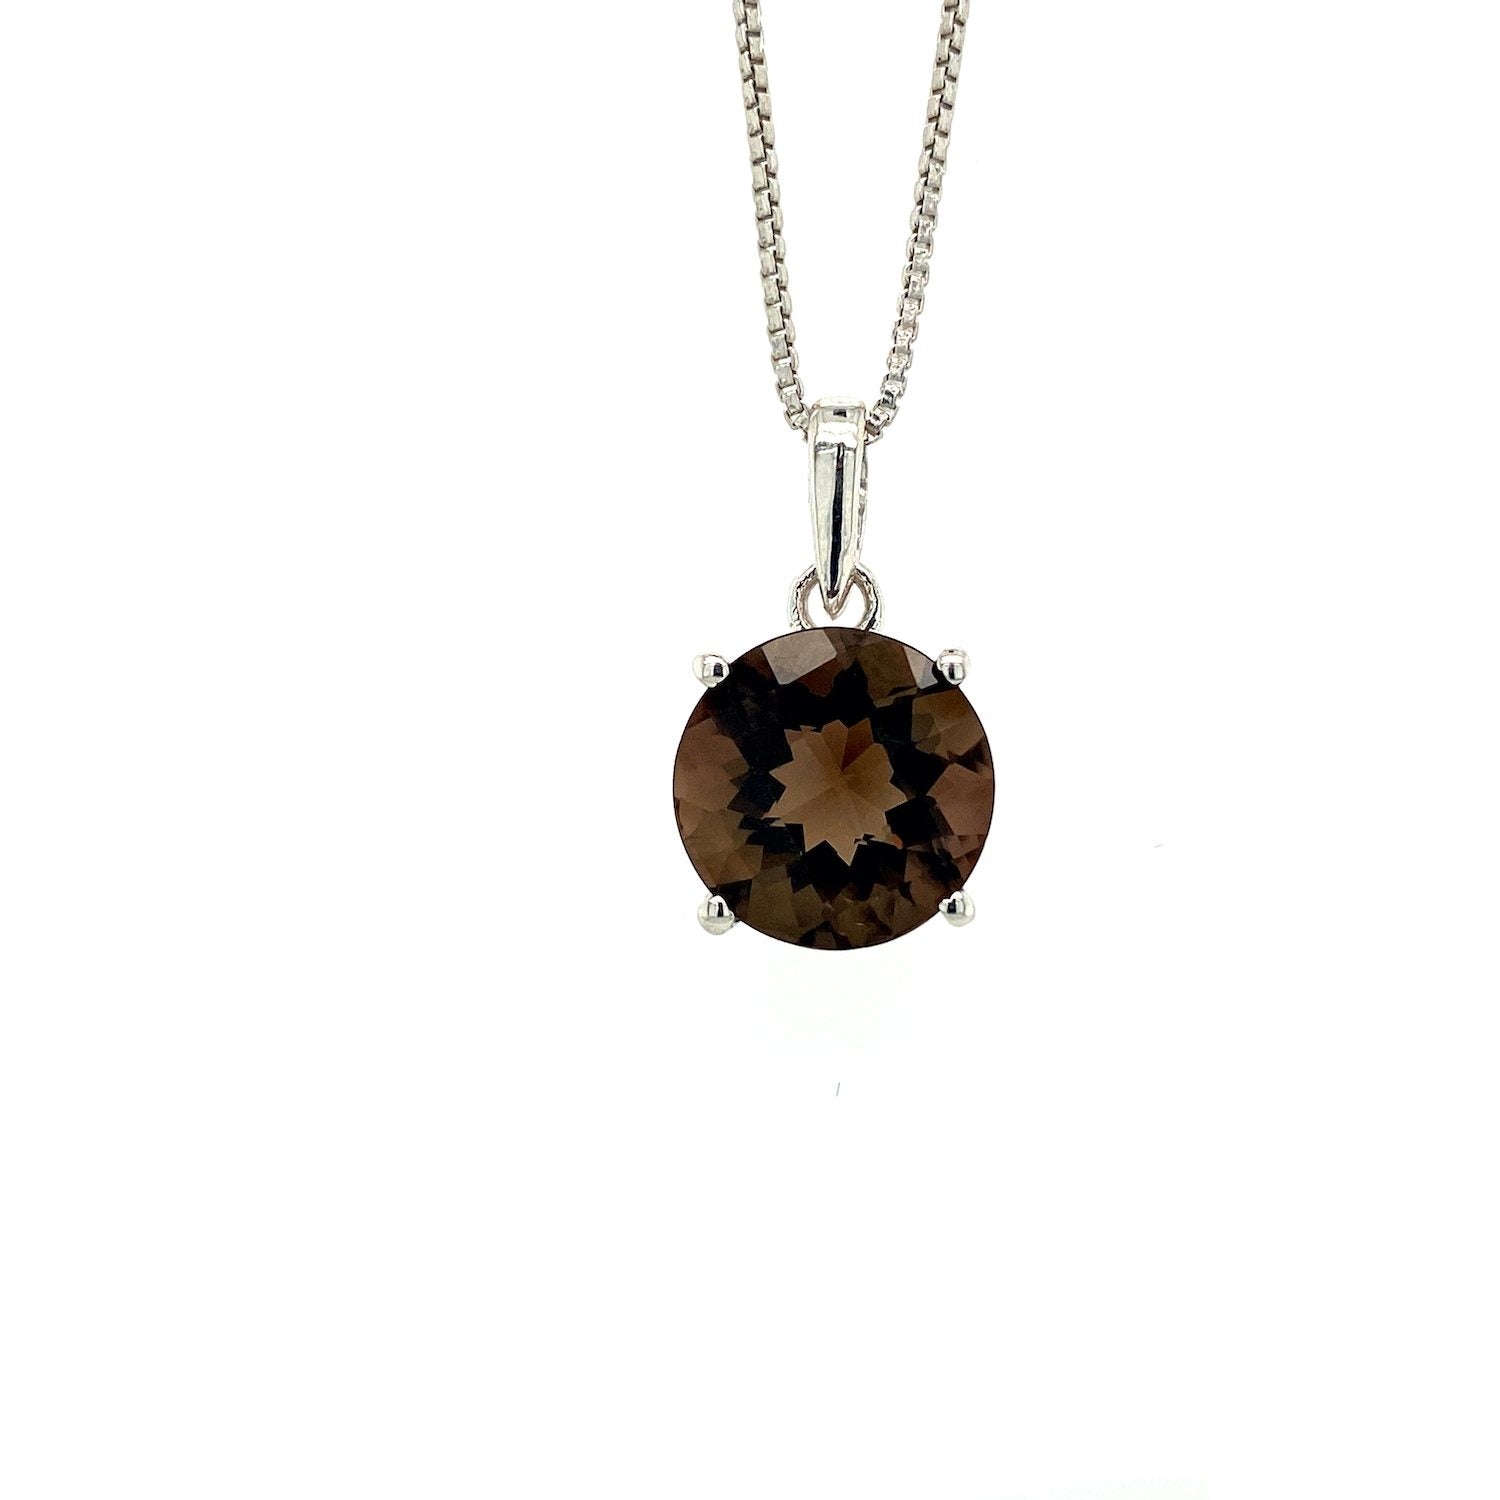 Buy Corocraft Smokey Topaz Necklace for Women and Girls at Amazon.in